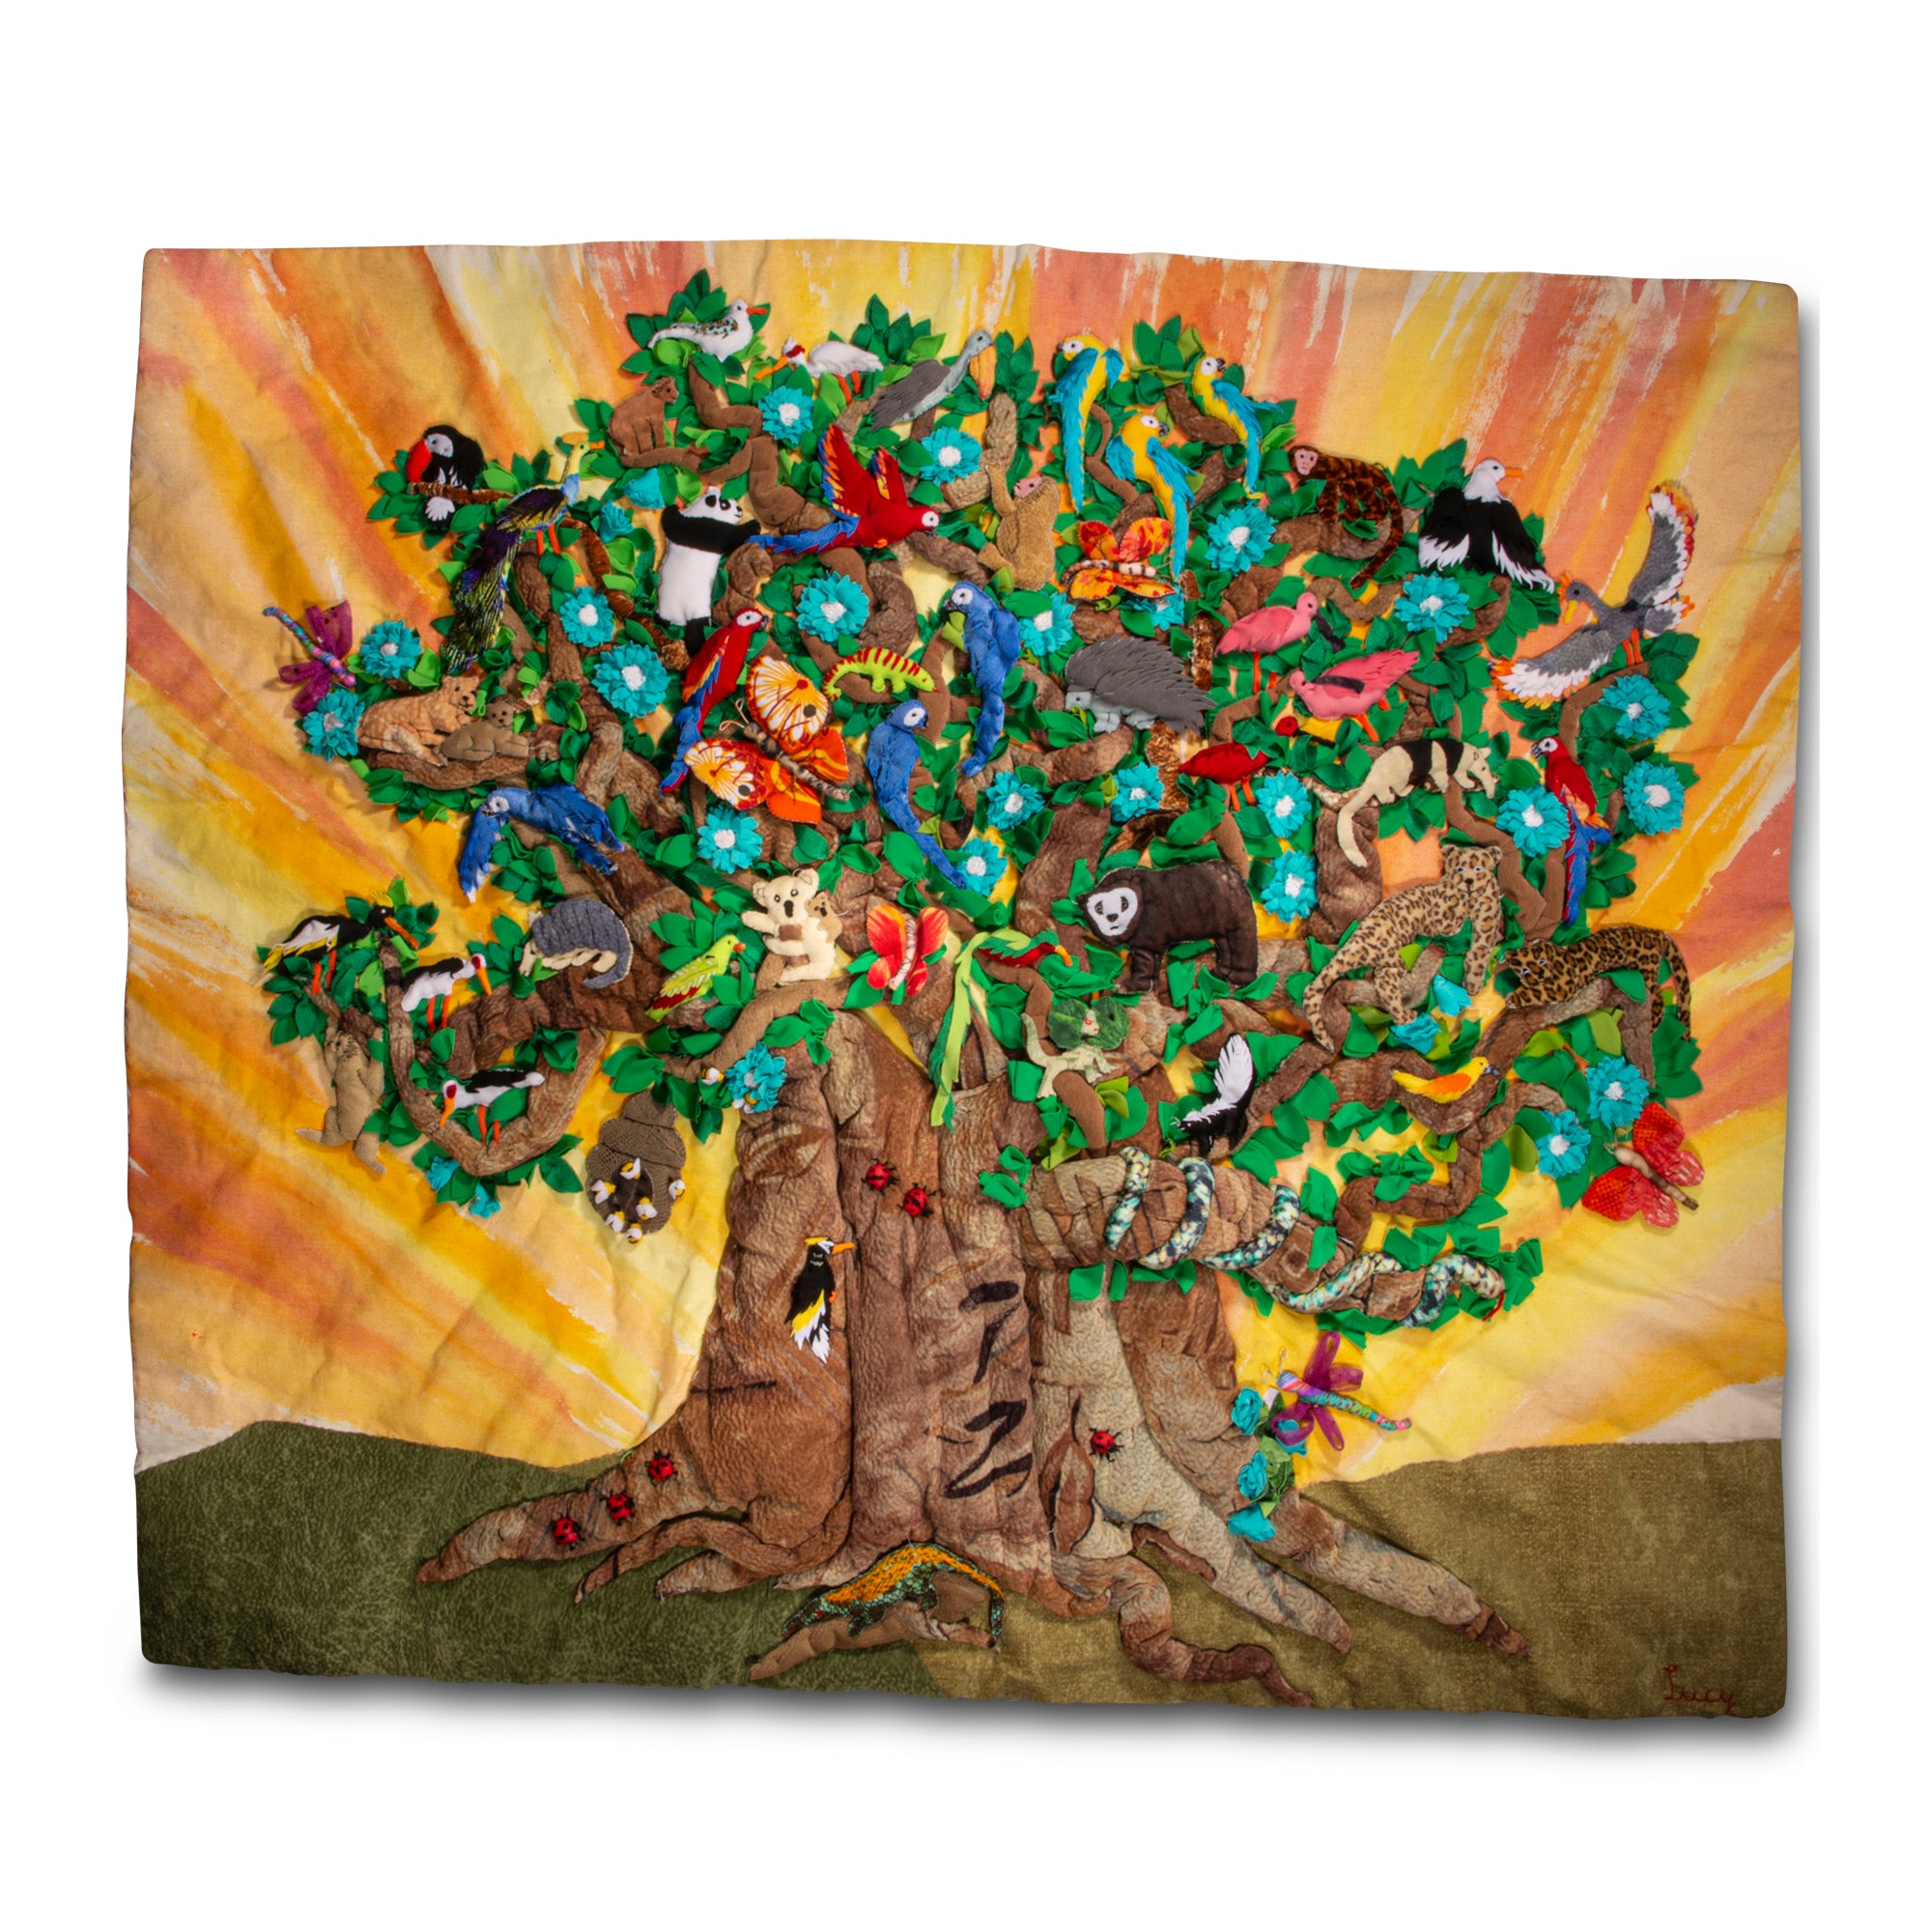 Rainforest Tree by Lucy and Alessandra - Large 3-D Arpillera Art Quilt